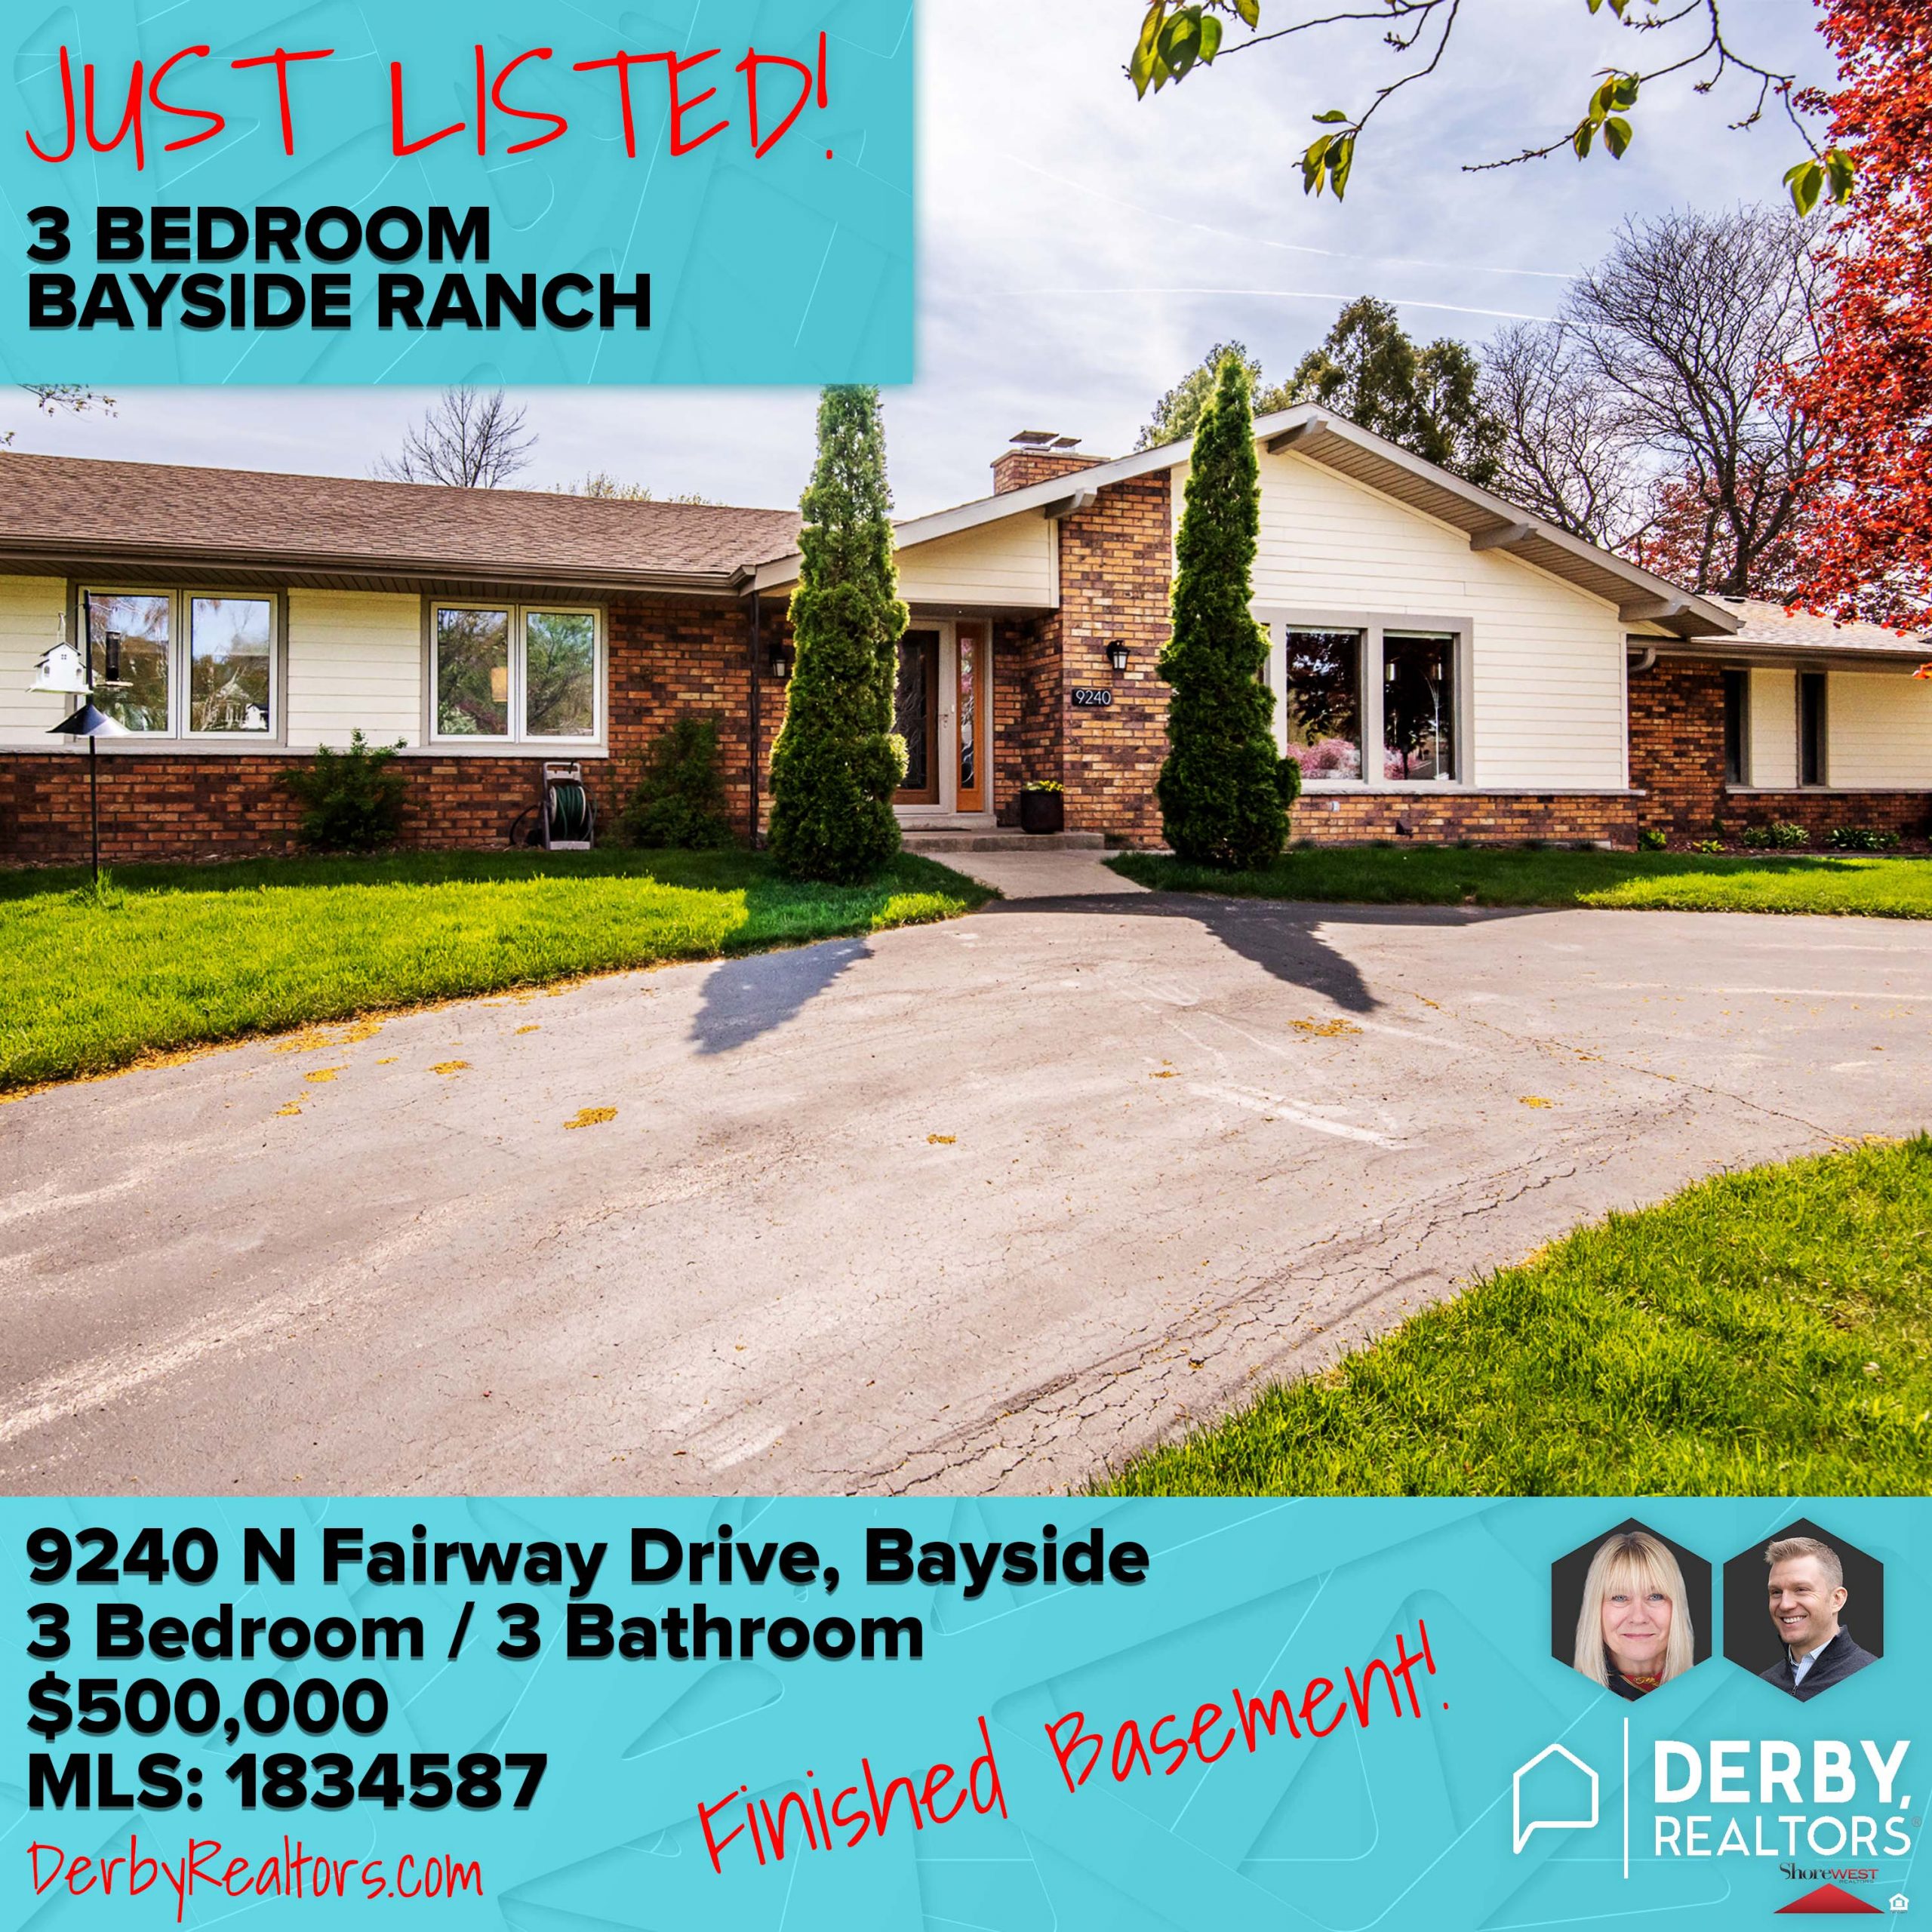 DERBY REALTORS - JUST LISTED - 9240 N Fairway Drive - SQUARE